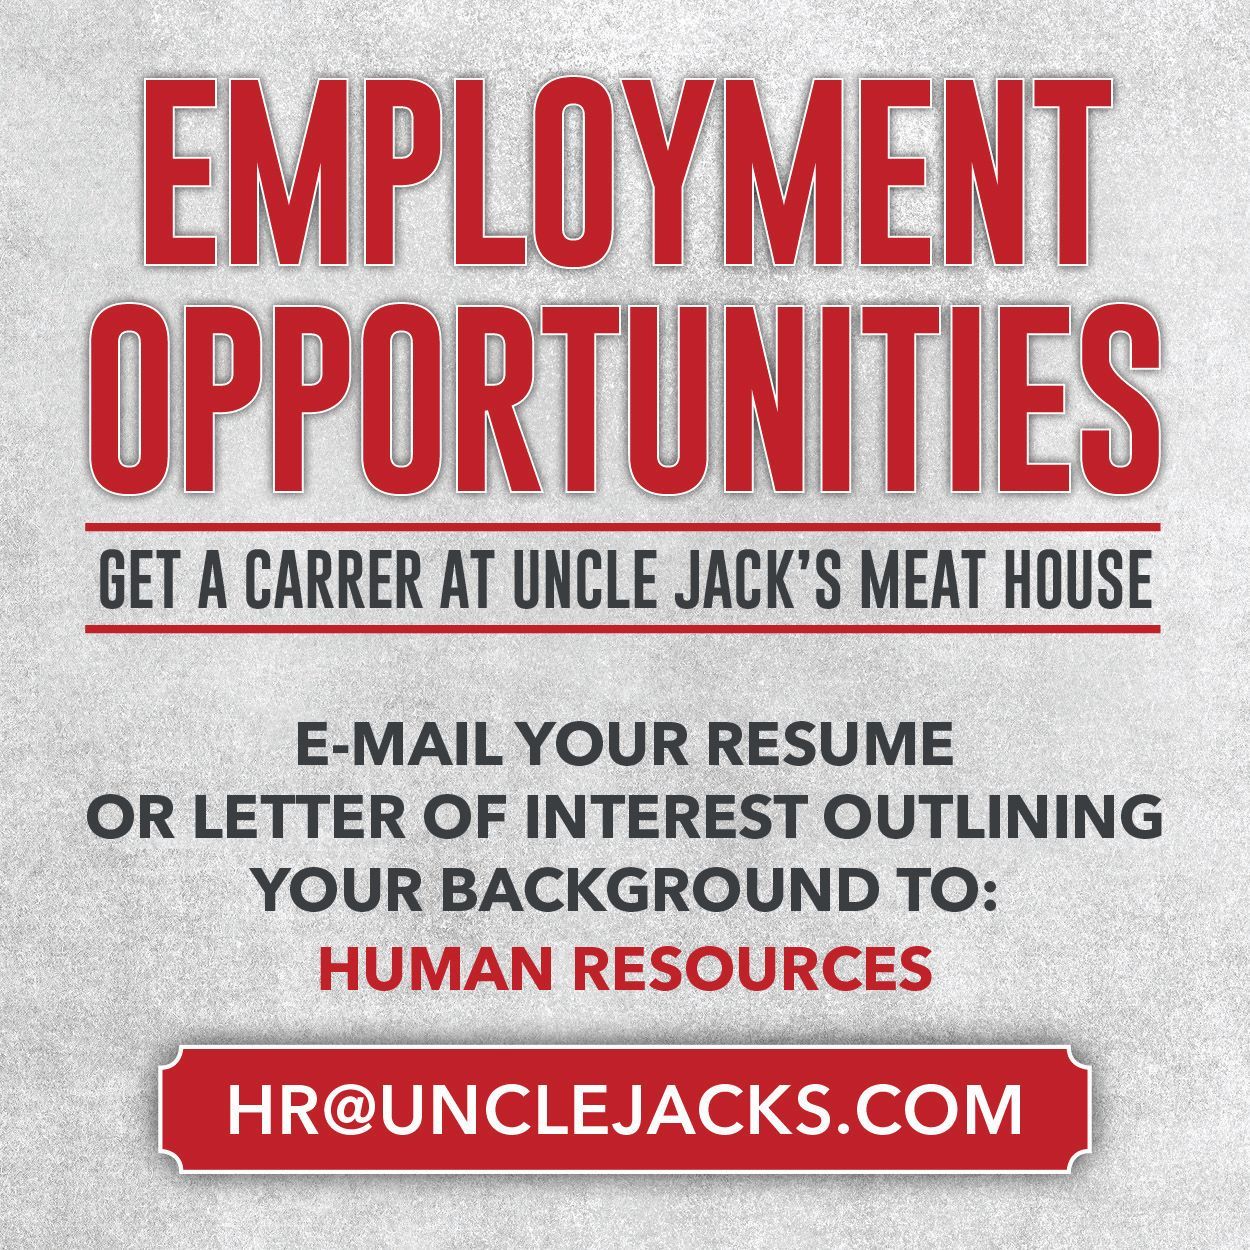 an advertisement for employment opportunities at uncle jack 's meat house